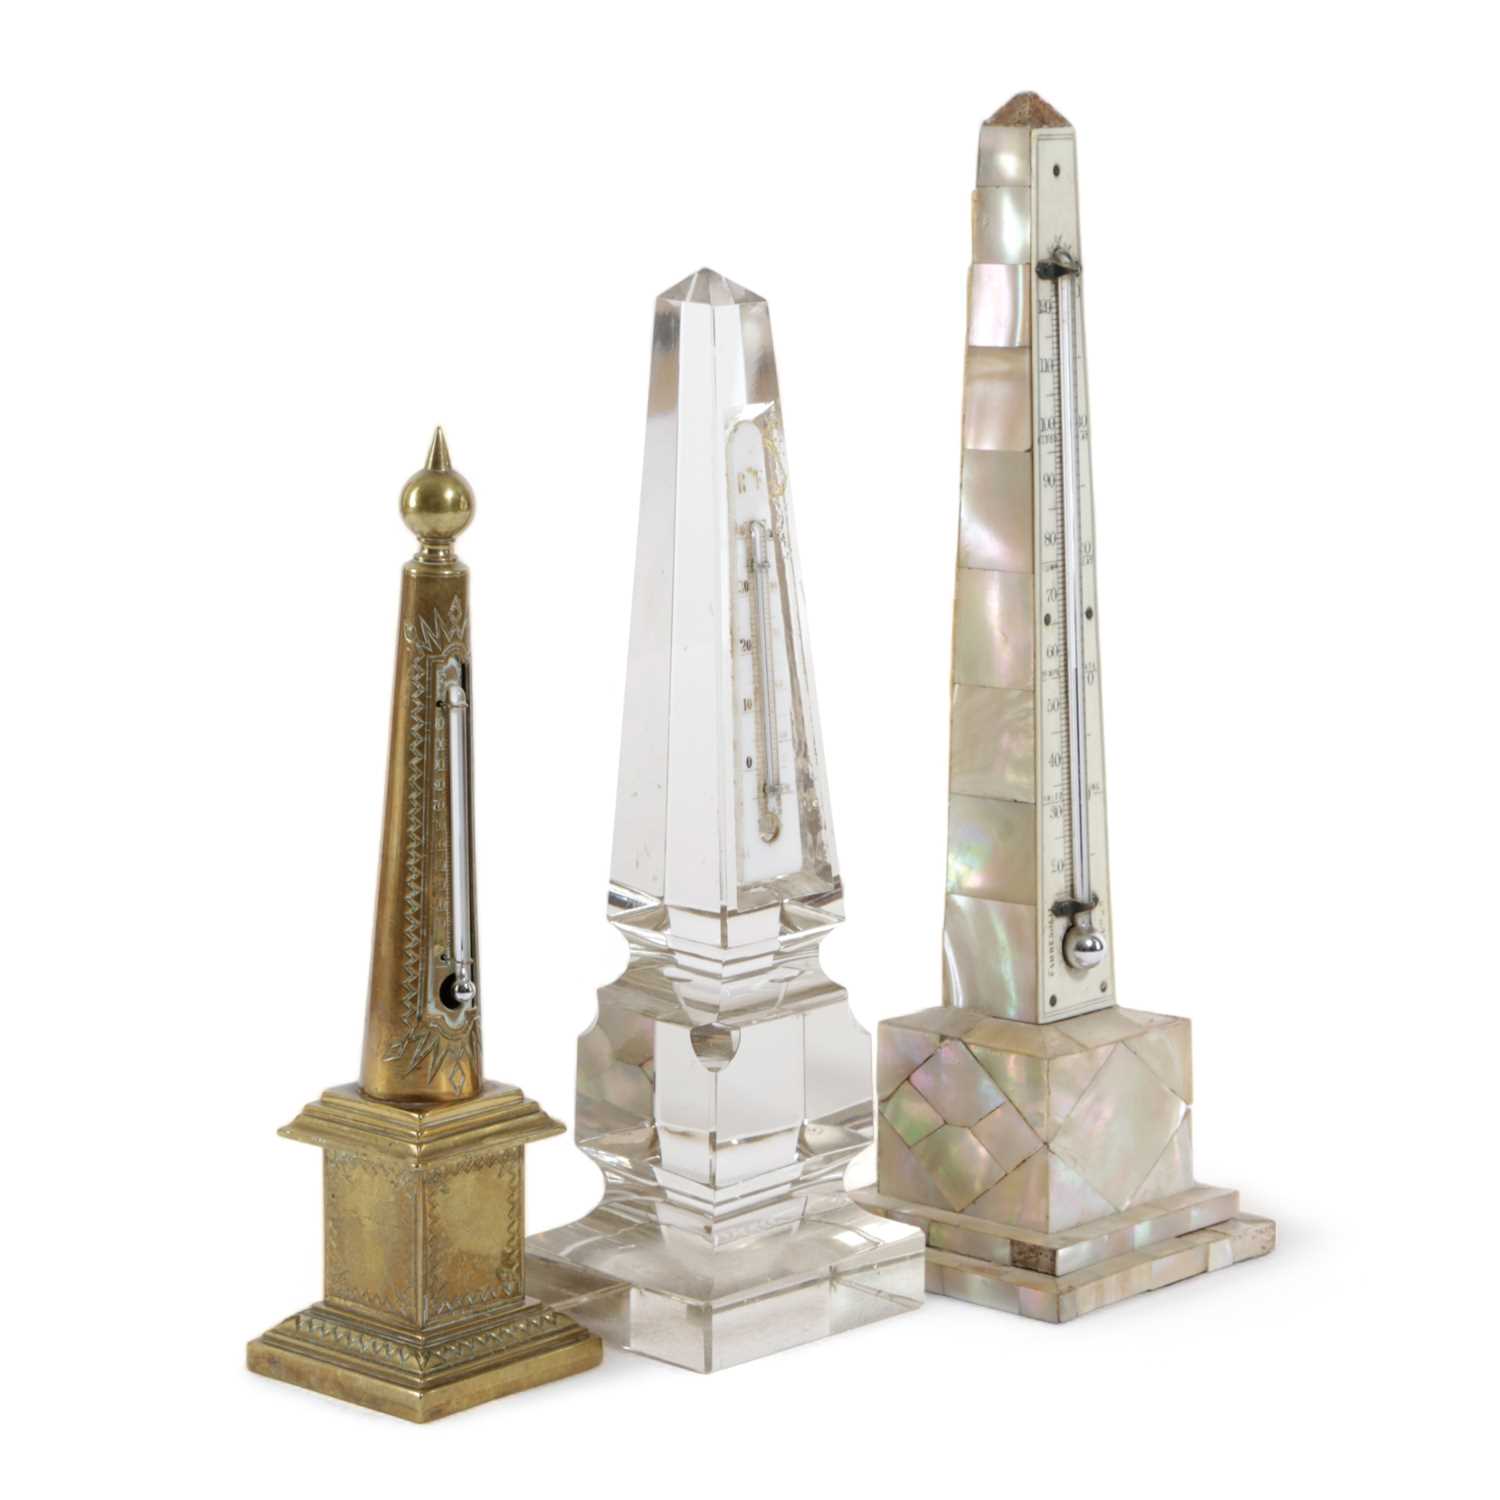 THREE OBELISK DESK THERMOMETERS 19TH CENTURY in brass, glass and mother of pearl, one with an